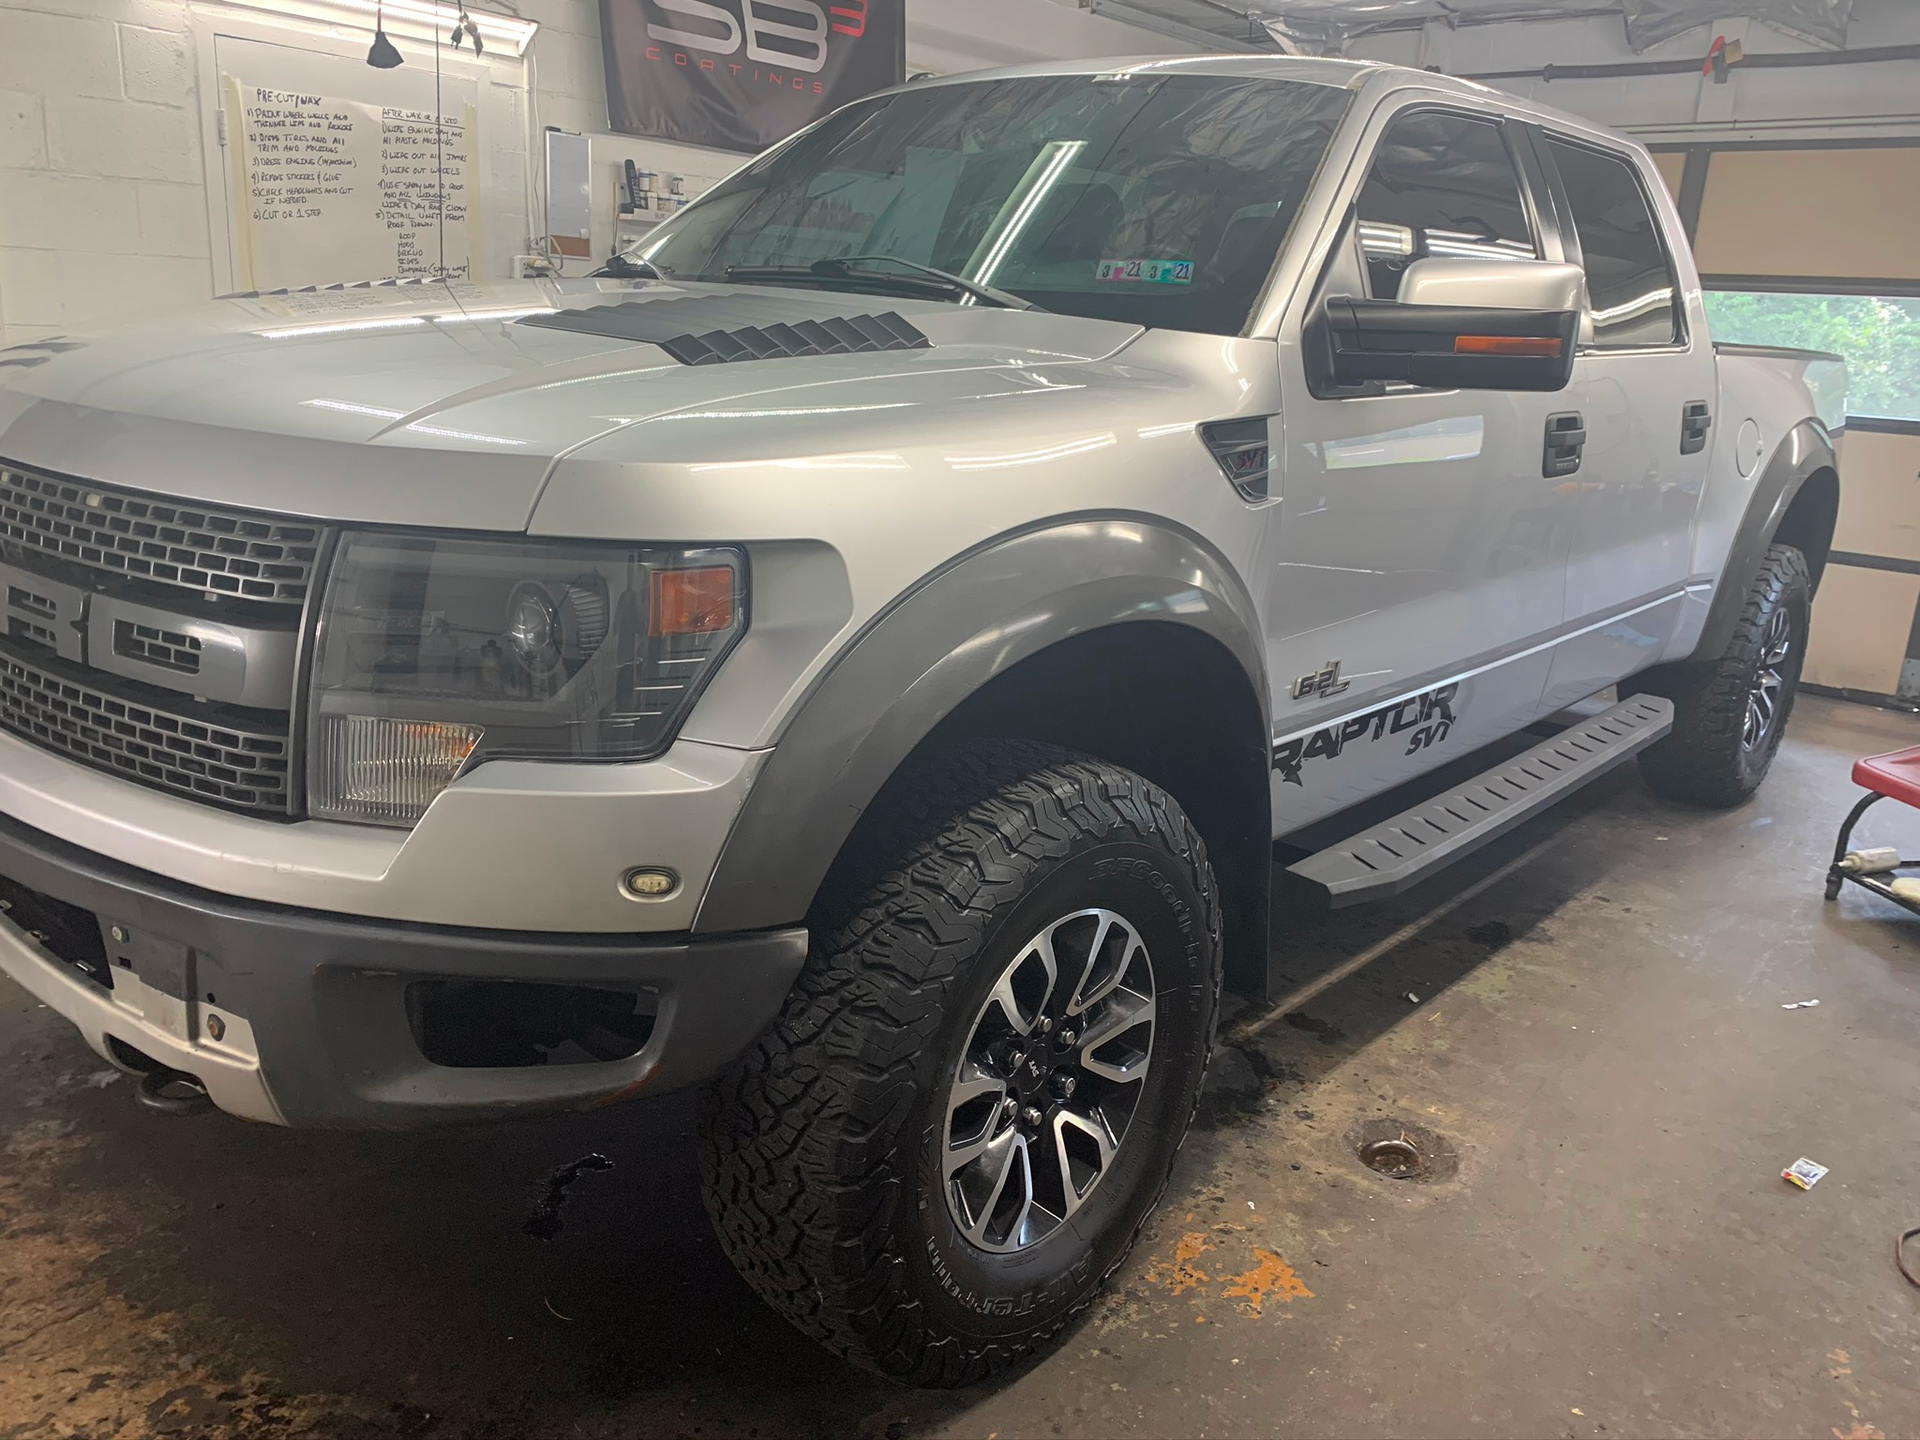 A silver ford raptor is parked in a garage.